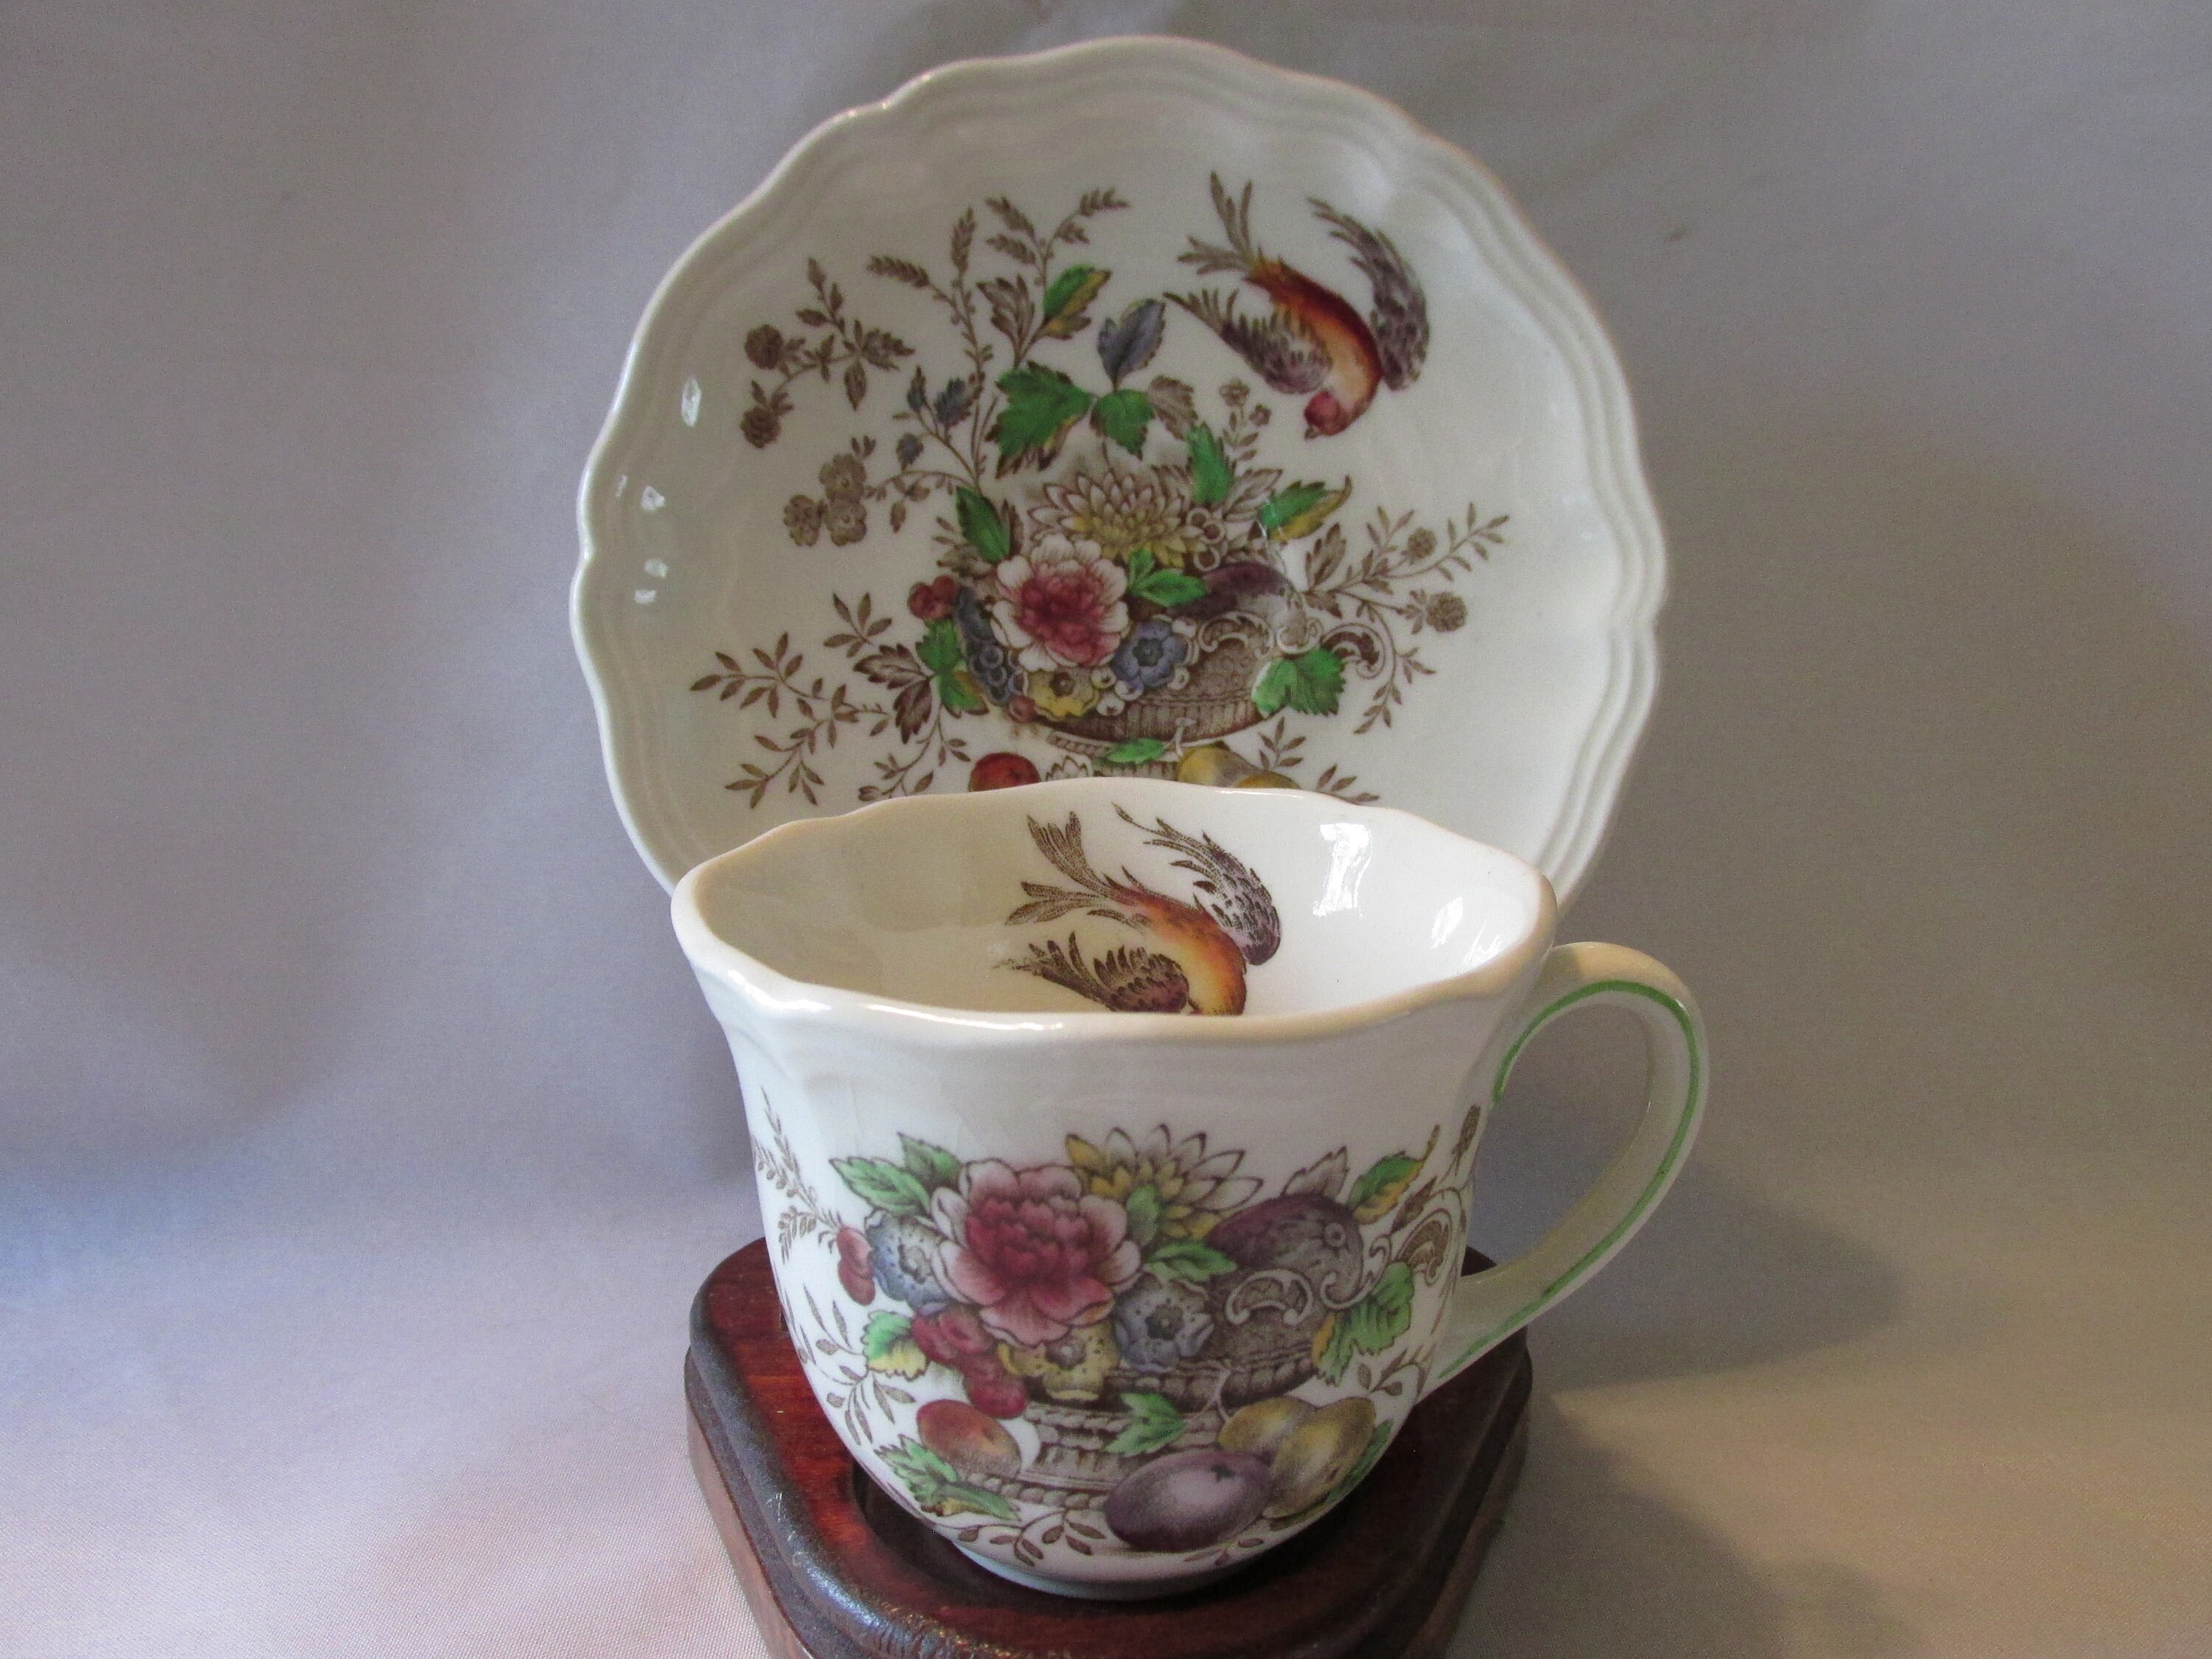 3 Royal Doulton Medford Demitasse Cups And Saucers Creamware 1930s Hand  Colored